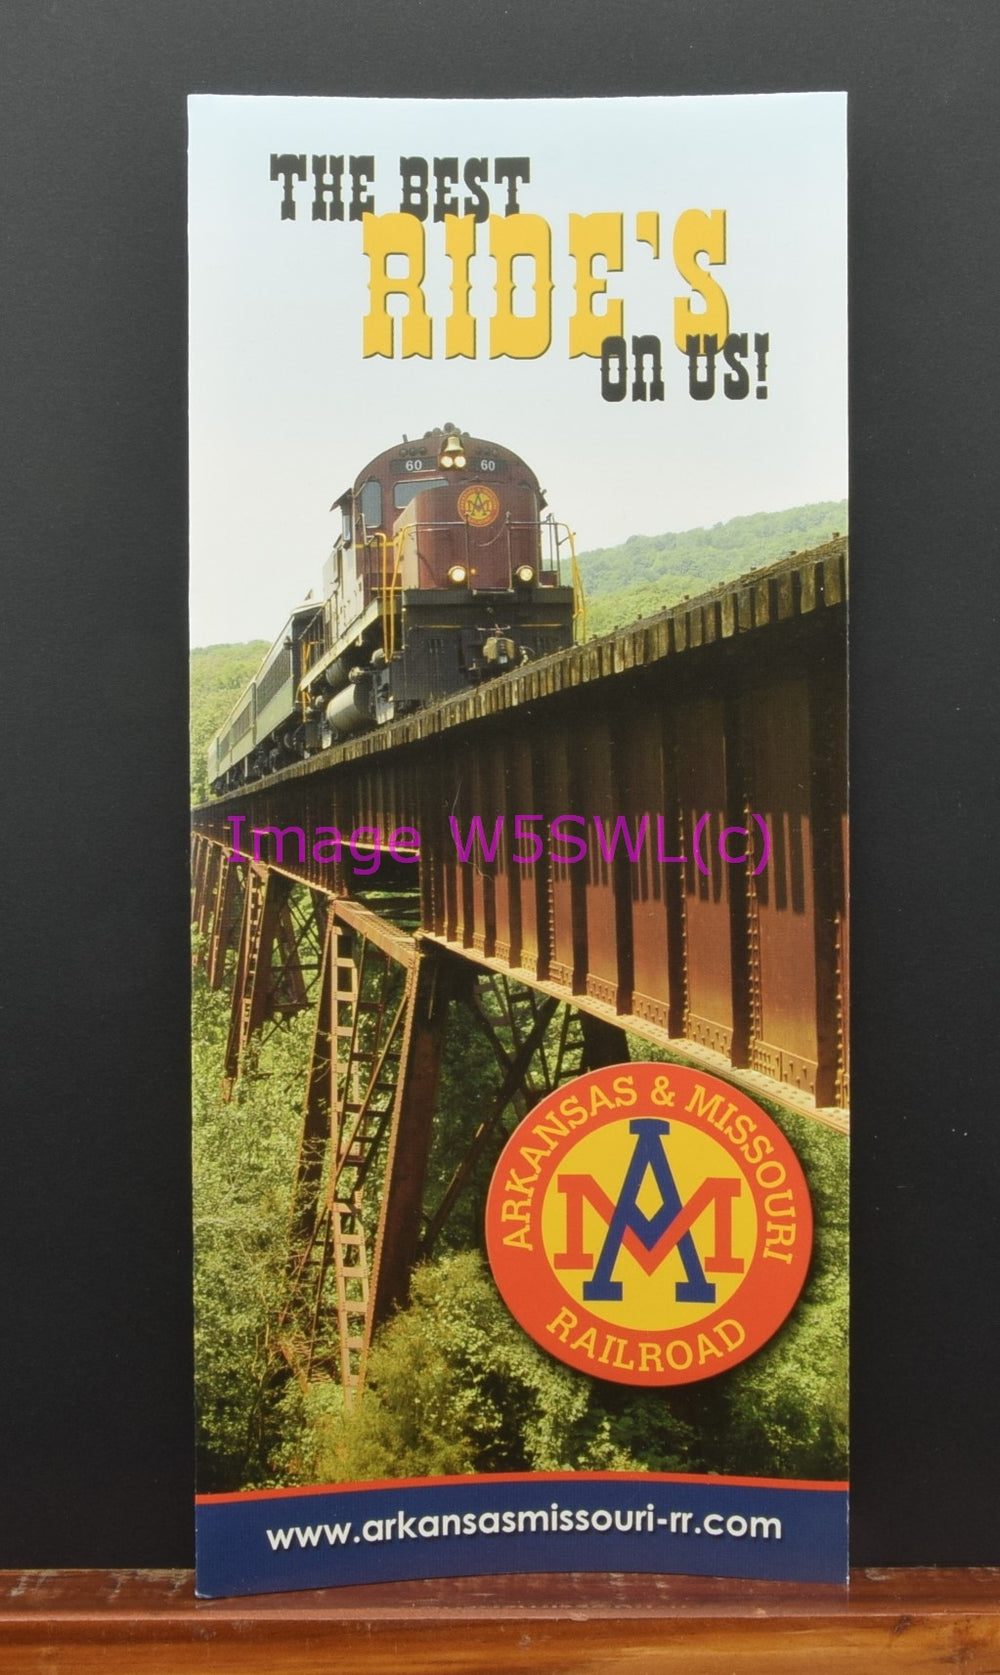 Vintage Arkansas & Missouri A&M Railroad "The Best Ride's On Us!" Brochure - Dave's Hobby Shop by W5SWL